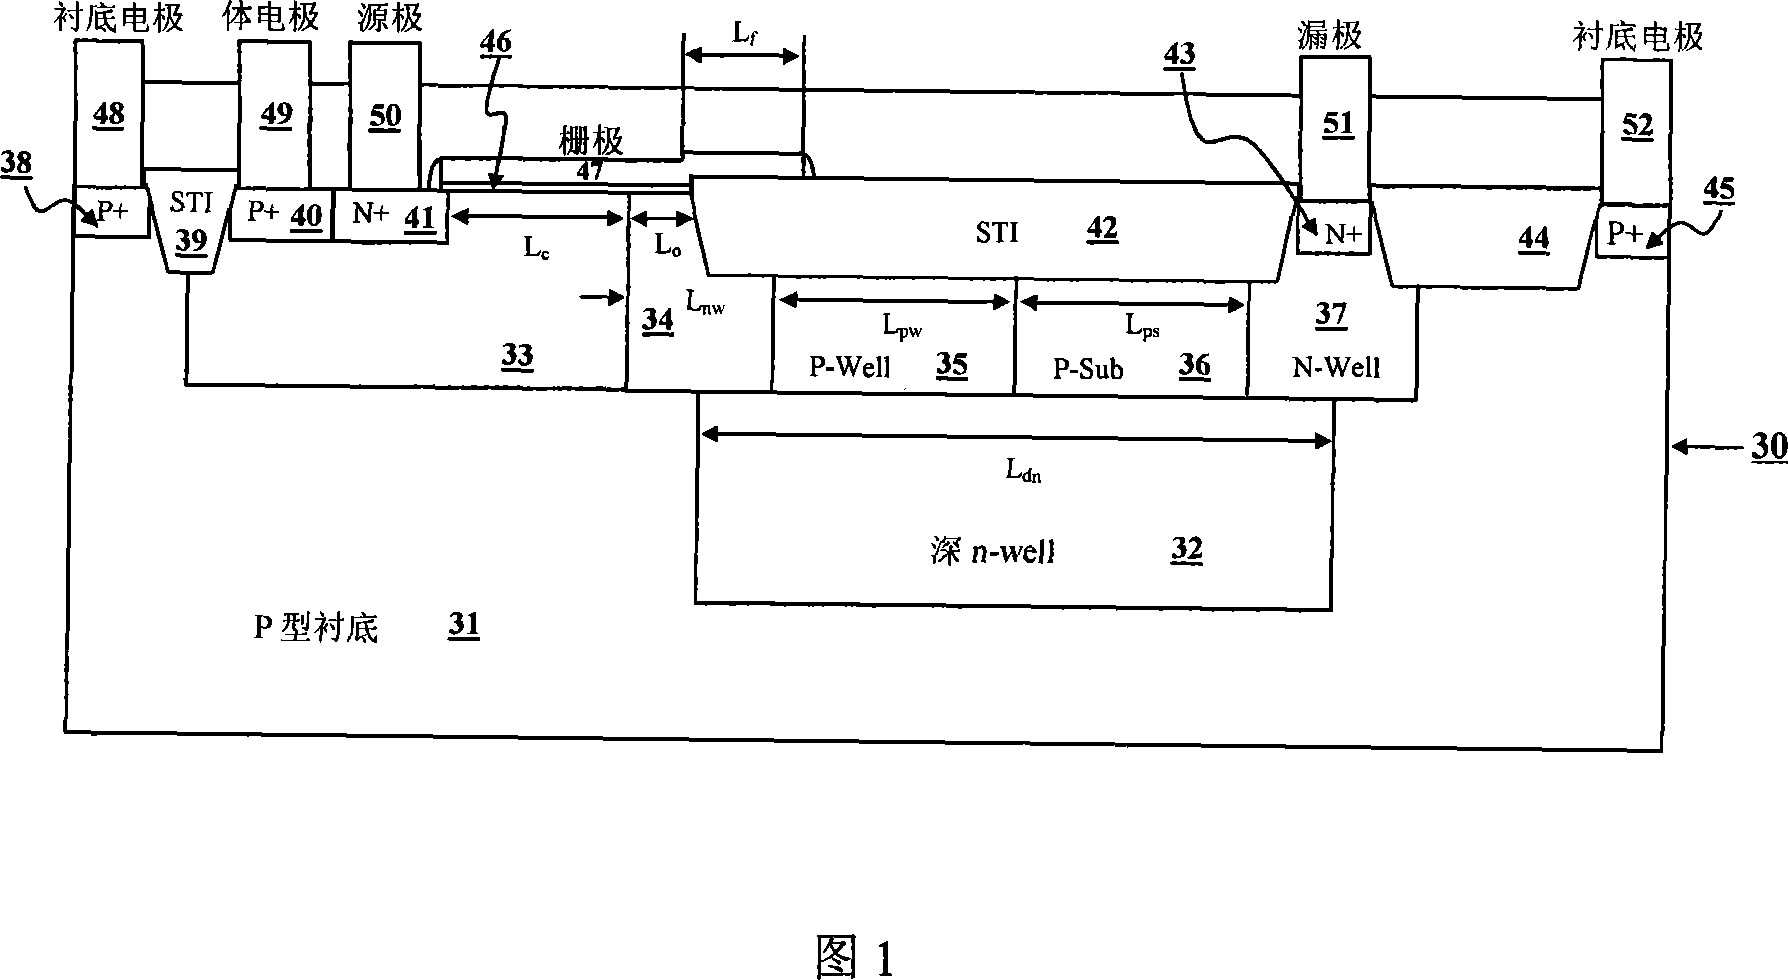 High-voltage MOSFET device